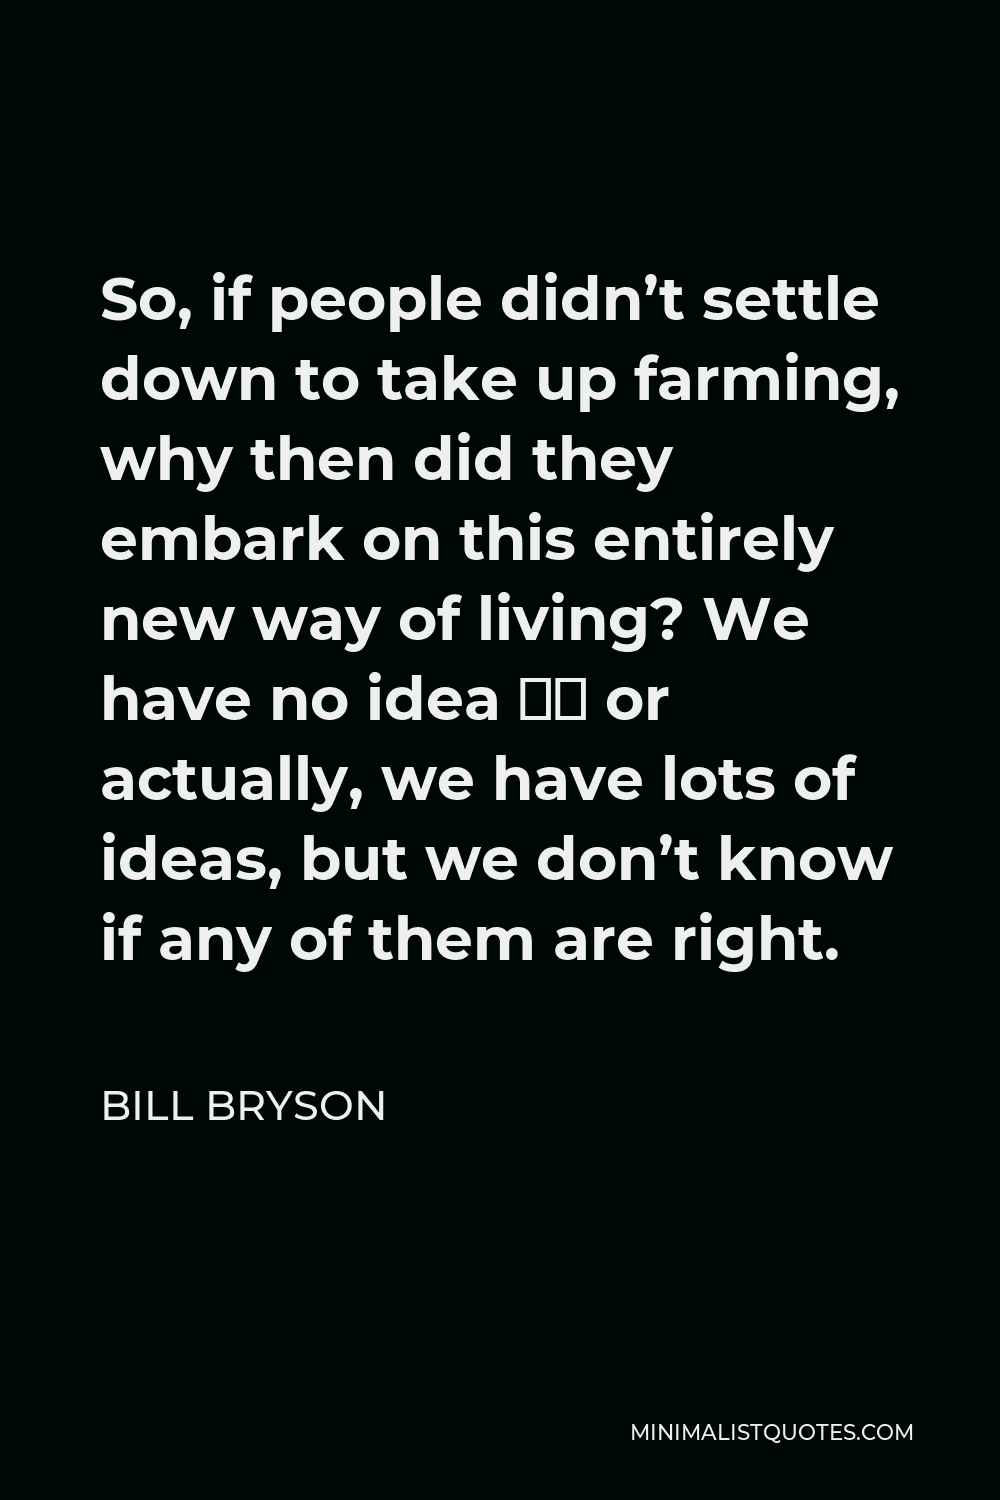 Bill Bryson Quote - So, if people didn’t settle down to take up farming, why then did they embark on this entirely new way of living? We have no idea – or actually, we have lots of ideas, but we don’t know if any of them are right.